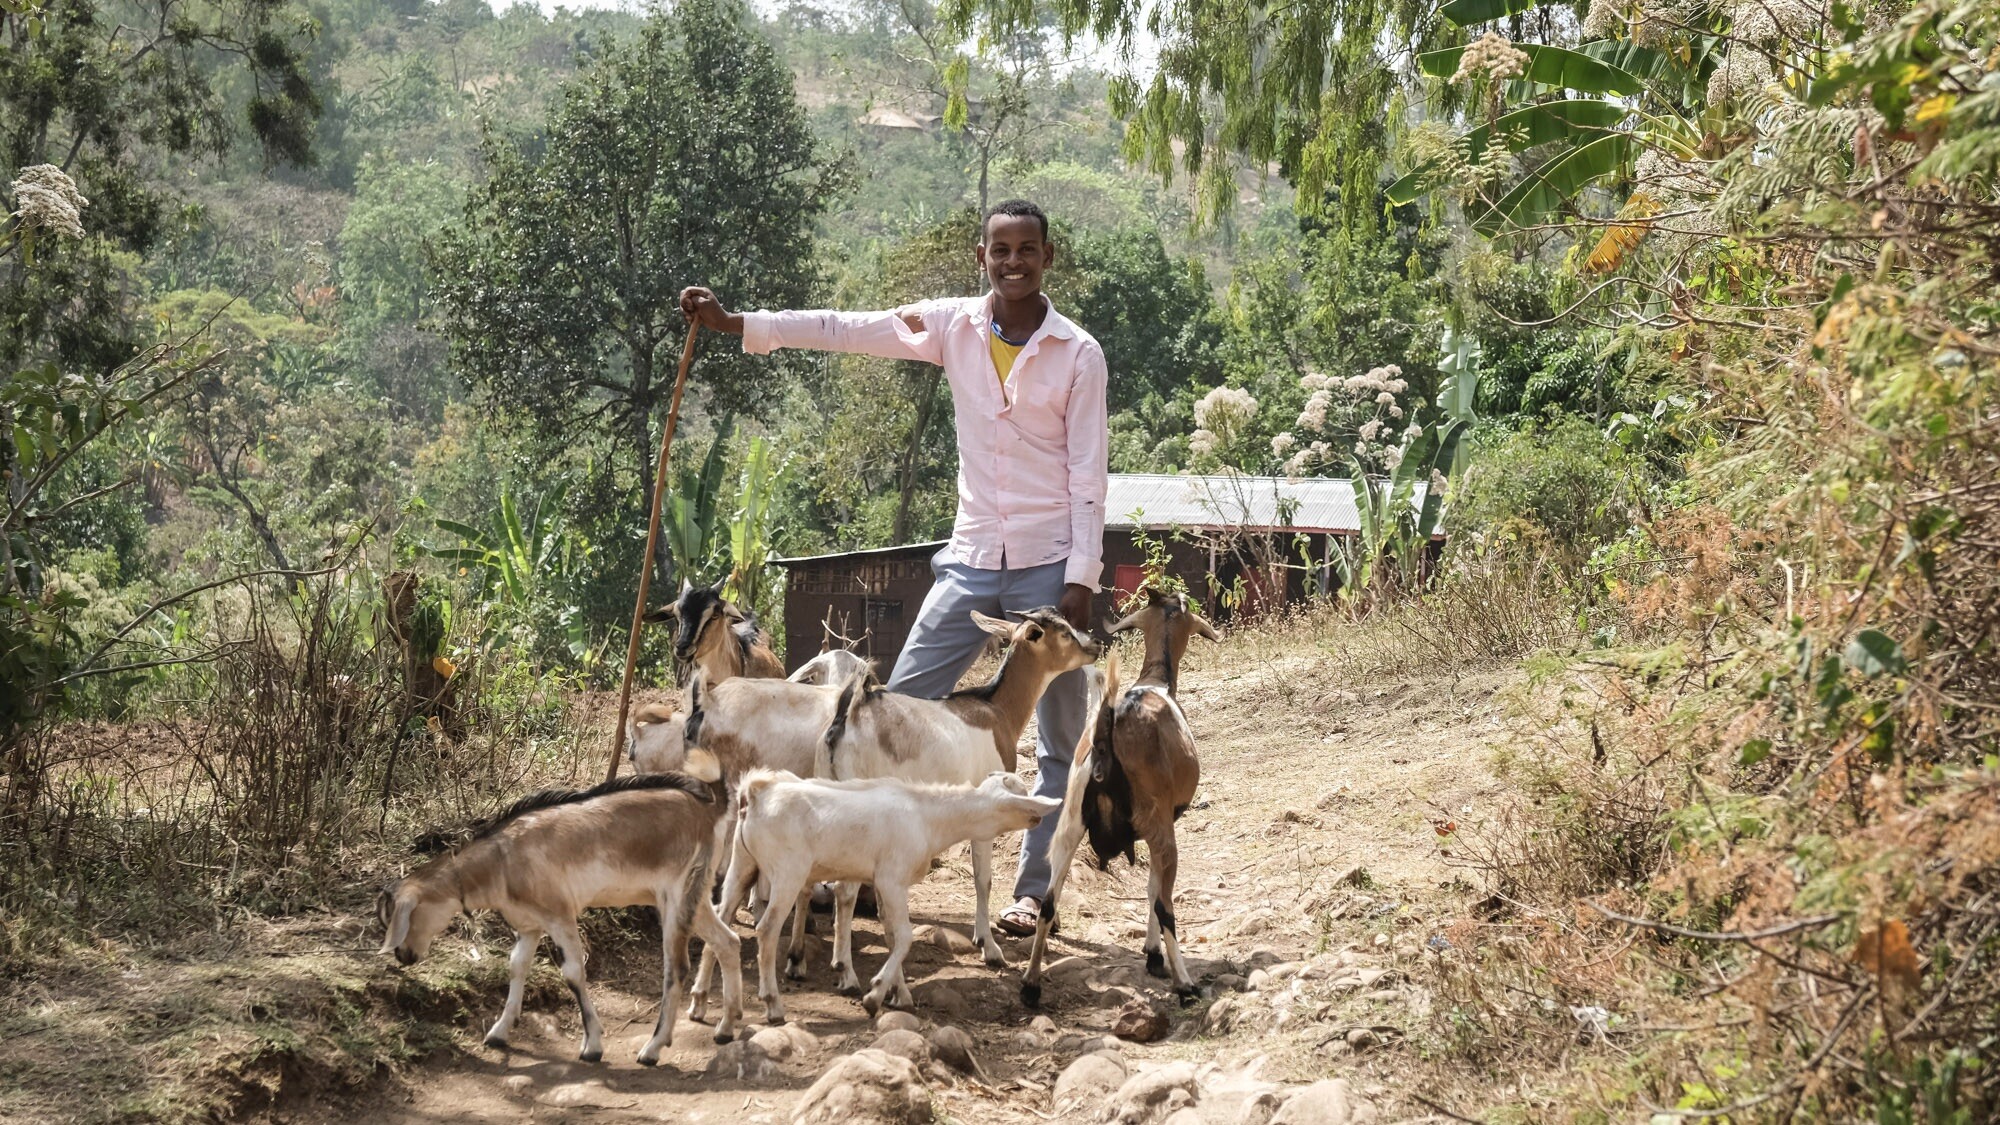 Petros, the barber, and his goats